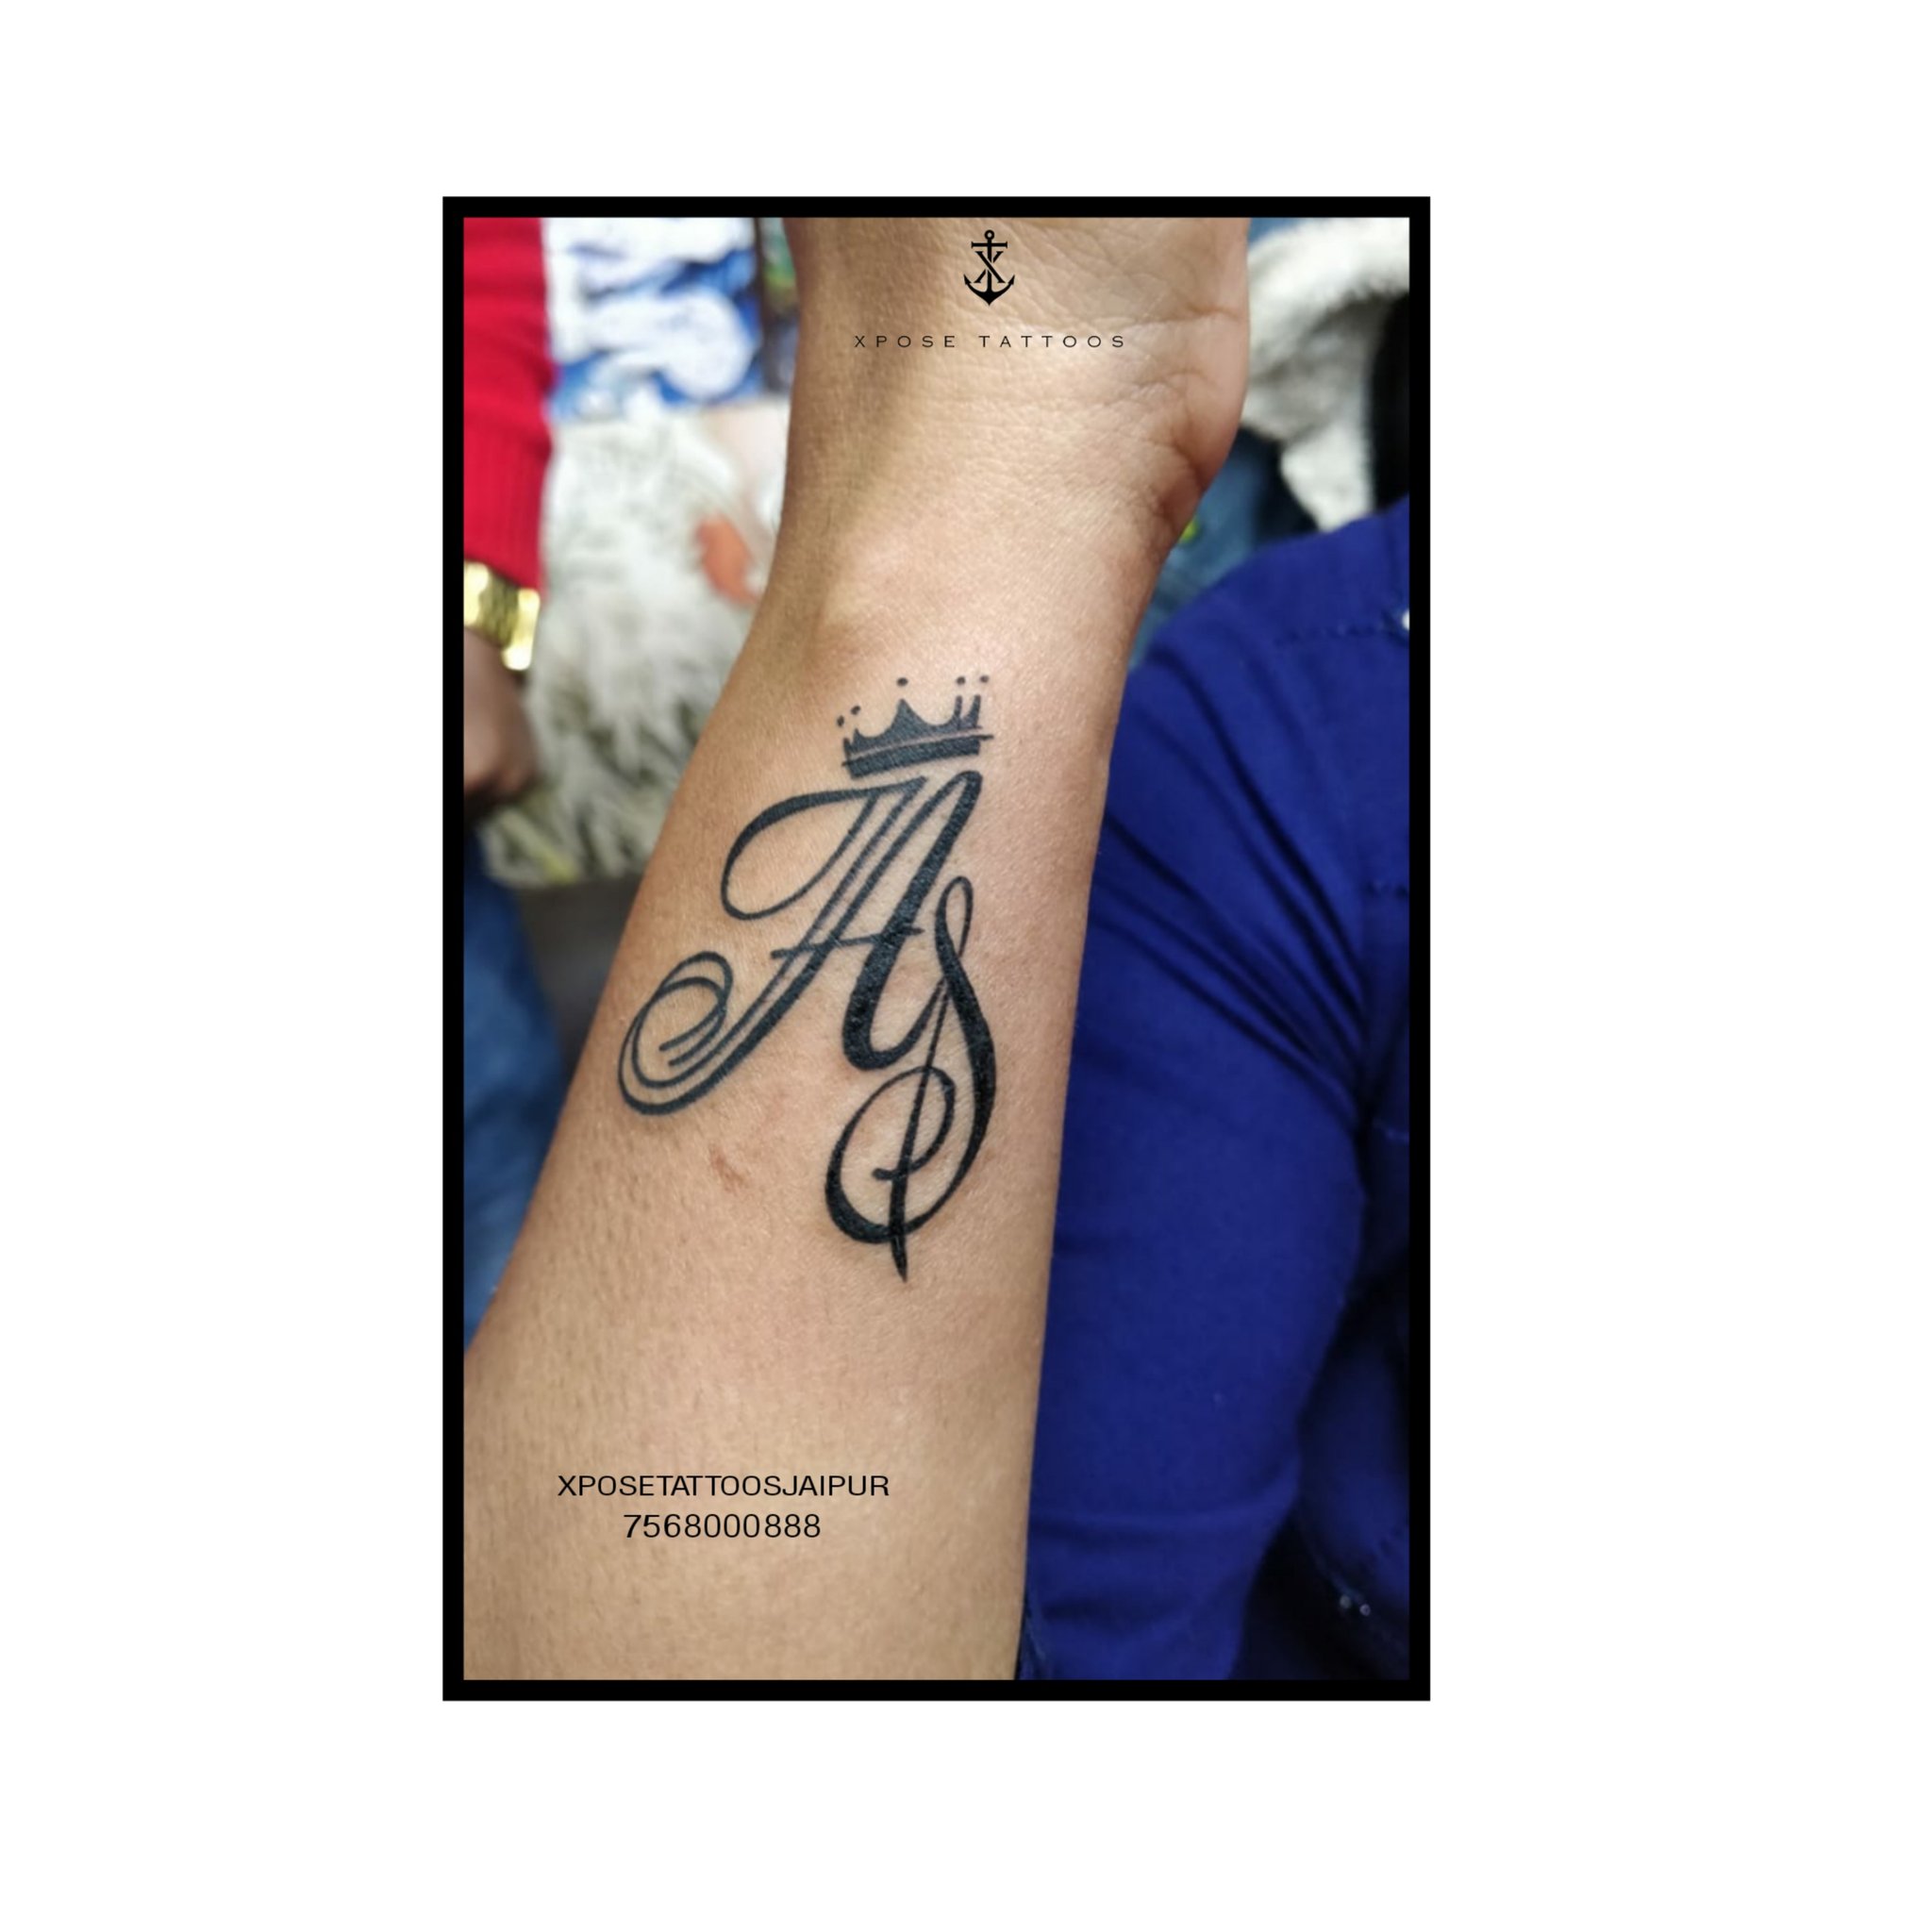 Aj Tattoo Art in MohamadwadiPune  Best Permanent Tattoo Artists in Pune   Justdial